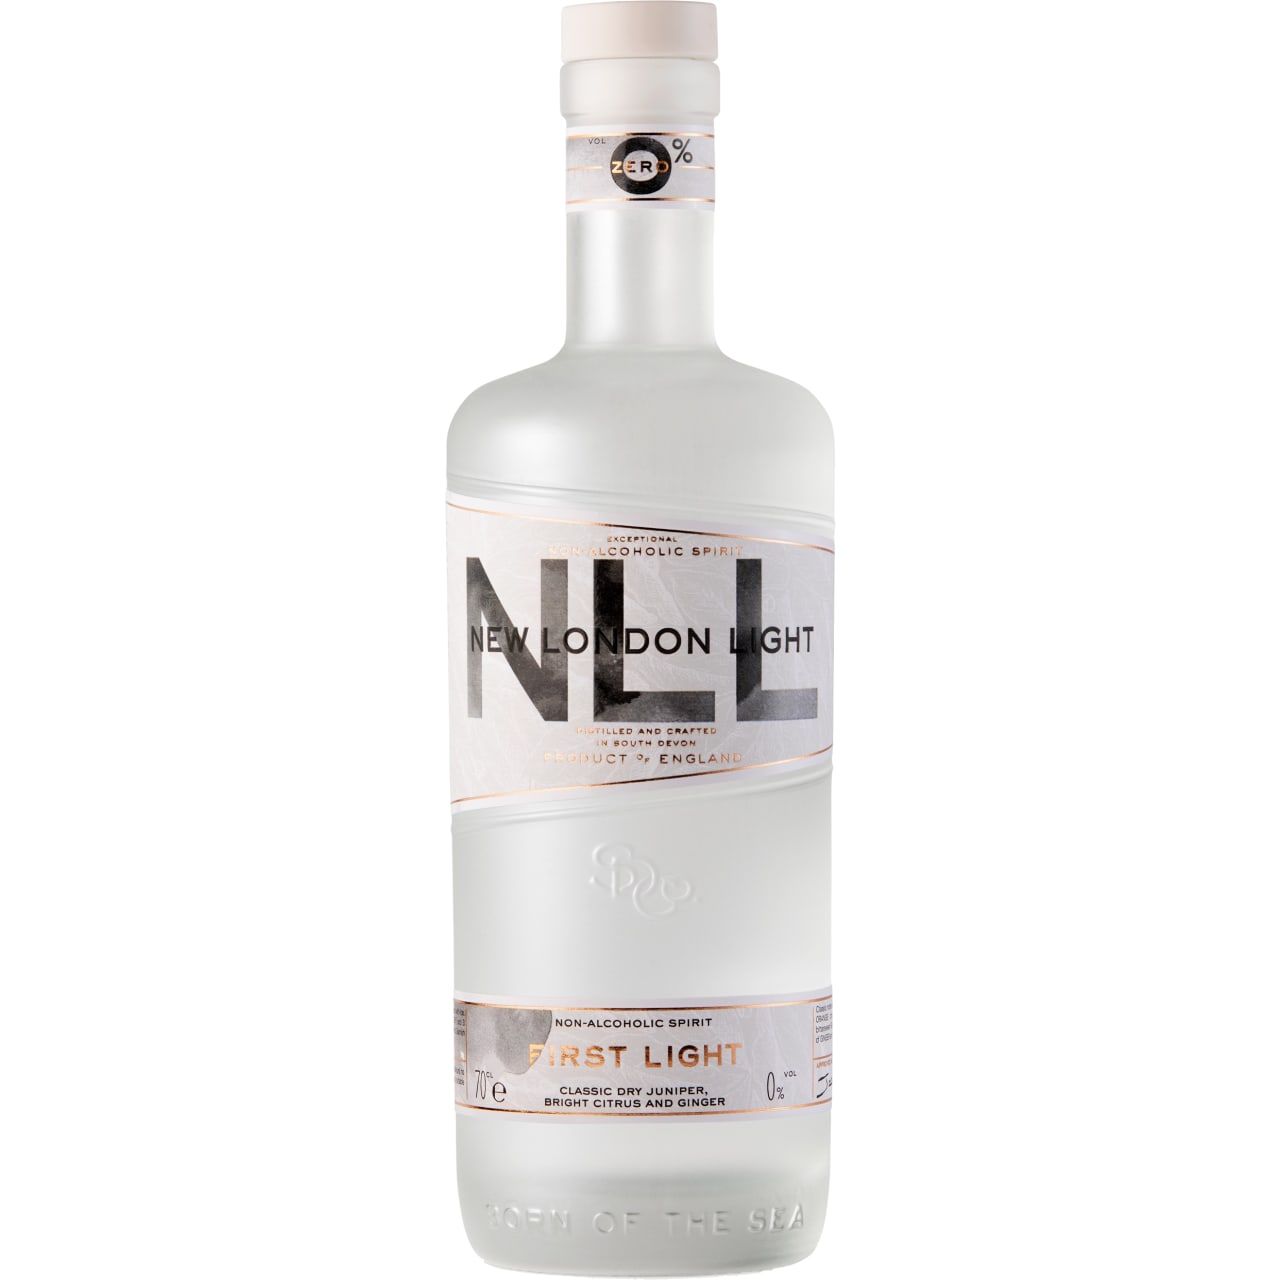 New London Light is a bold and refreshing non-alcoholic spirit inspired by gin, with an outstanding spectrum of flavour.